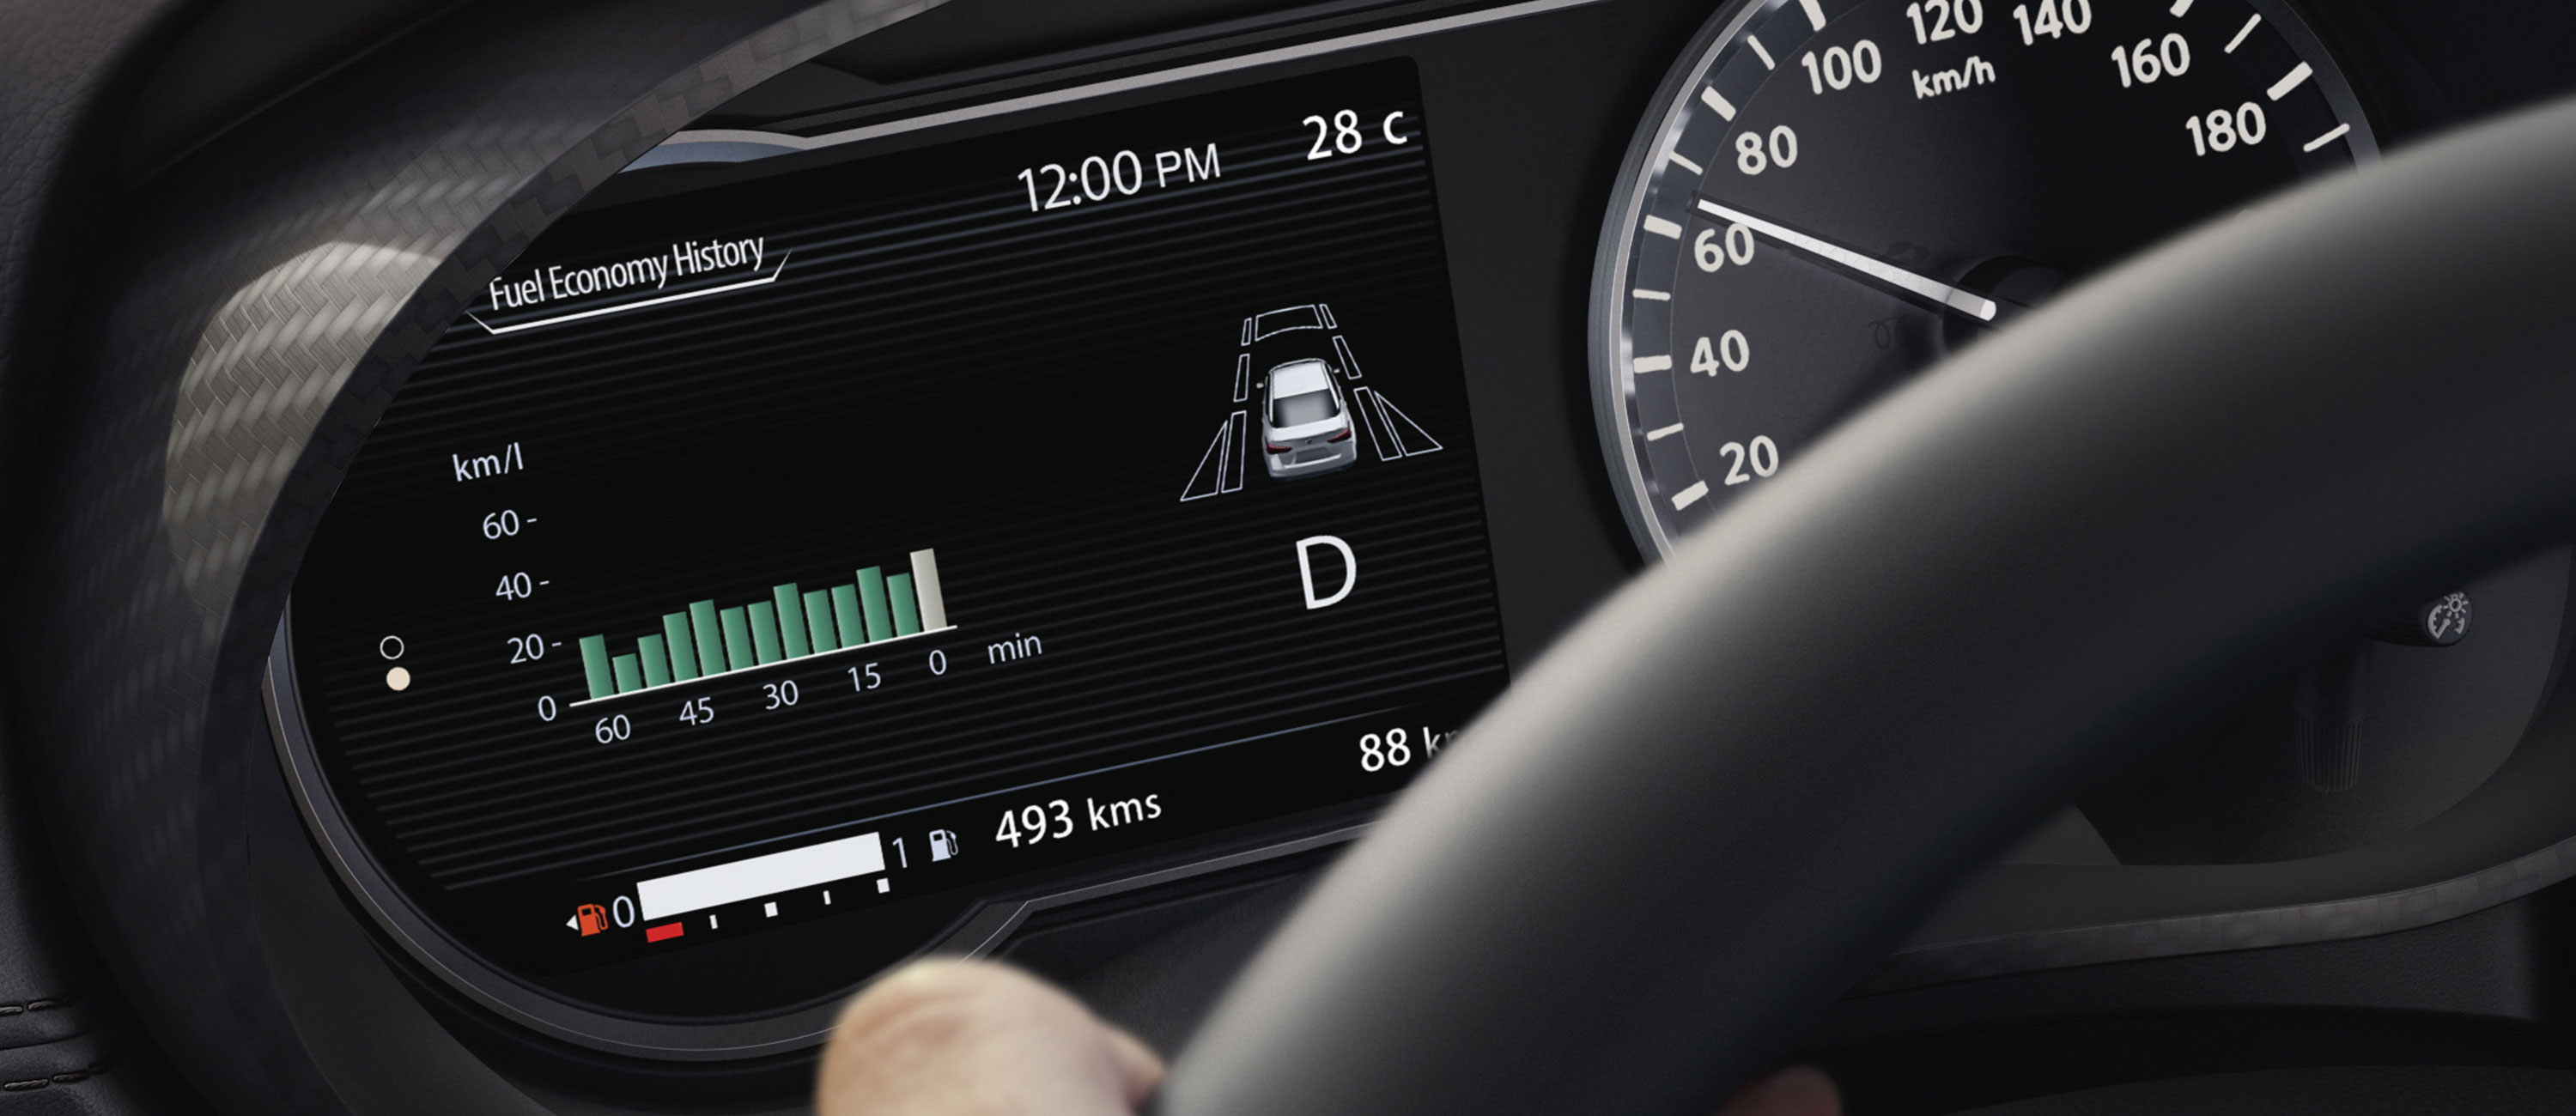 Nissan SUNNY Advanced Drive Assist Display showing fuel economy